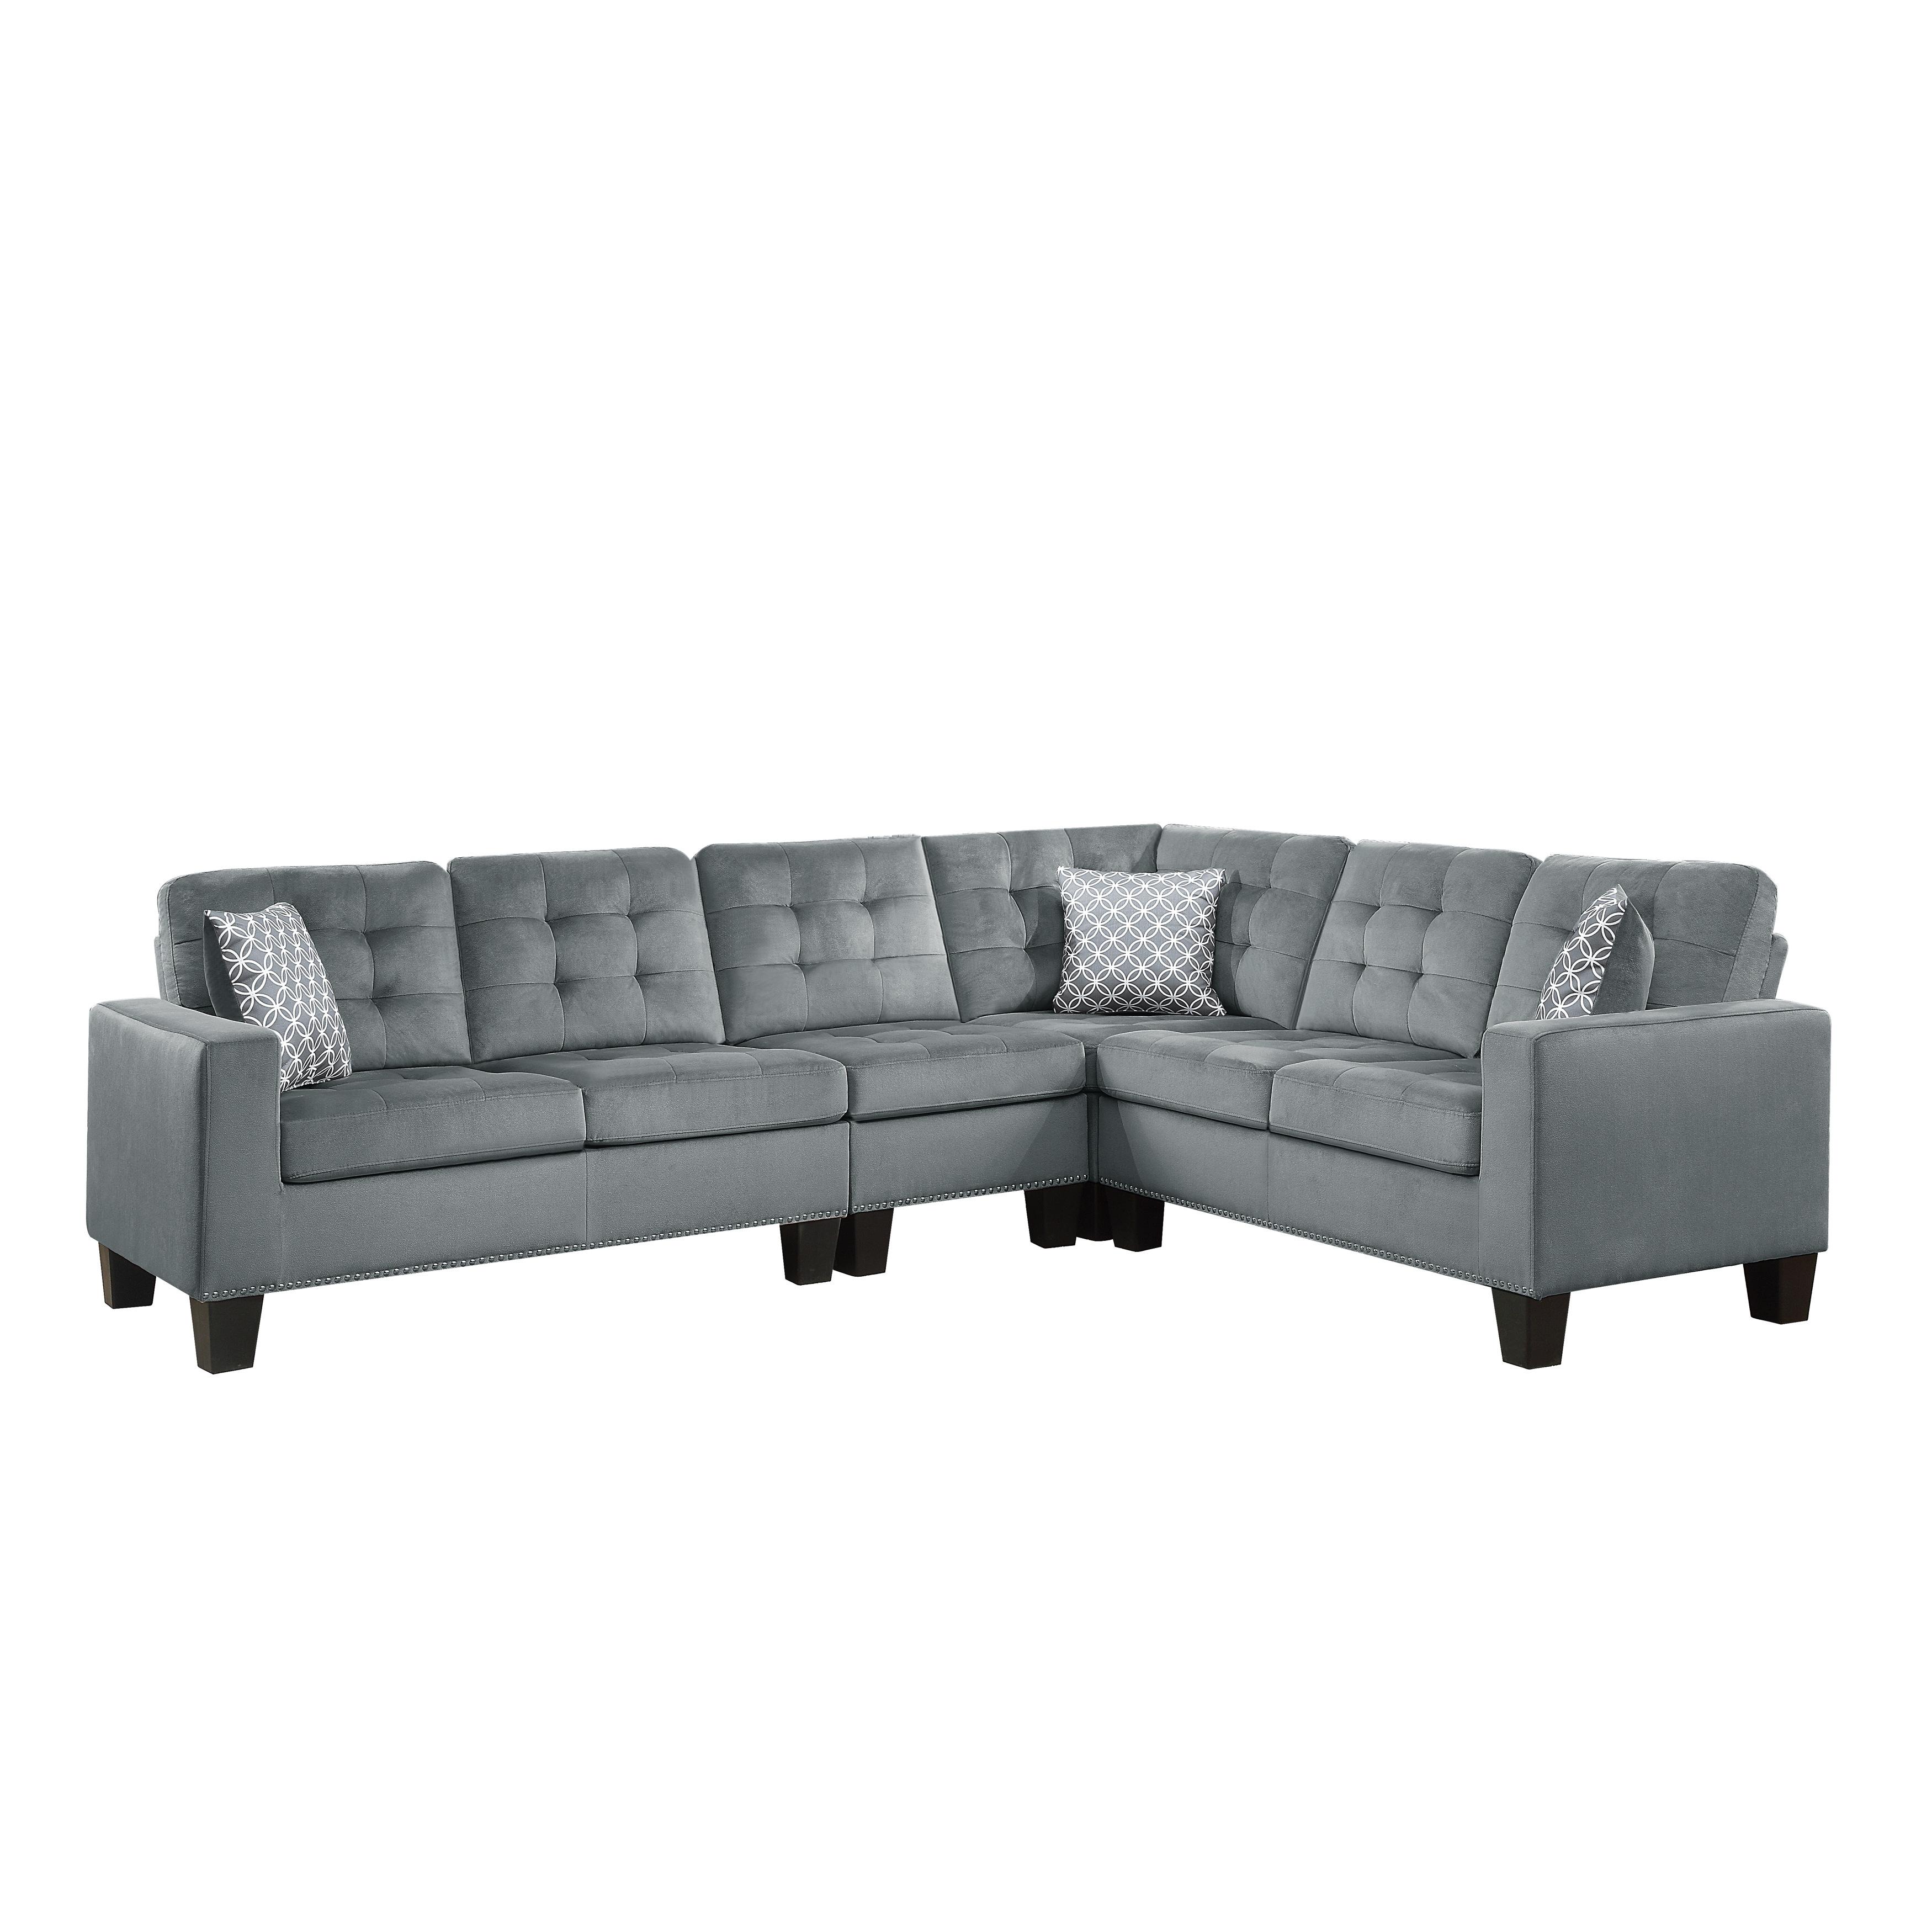 Traditional Sectional 9957GY*SC Lantana 9957GY*SC in Gray Microfiber